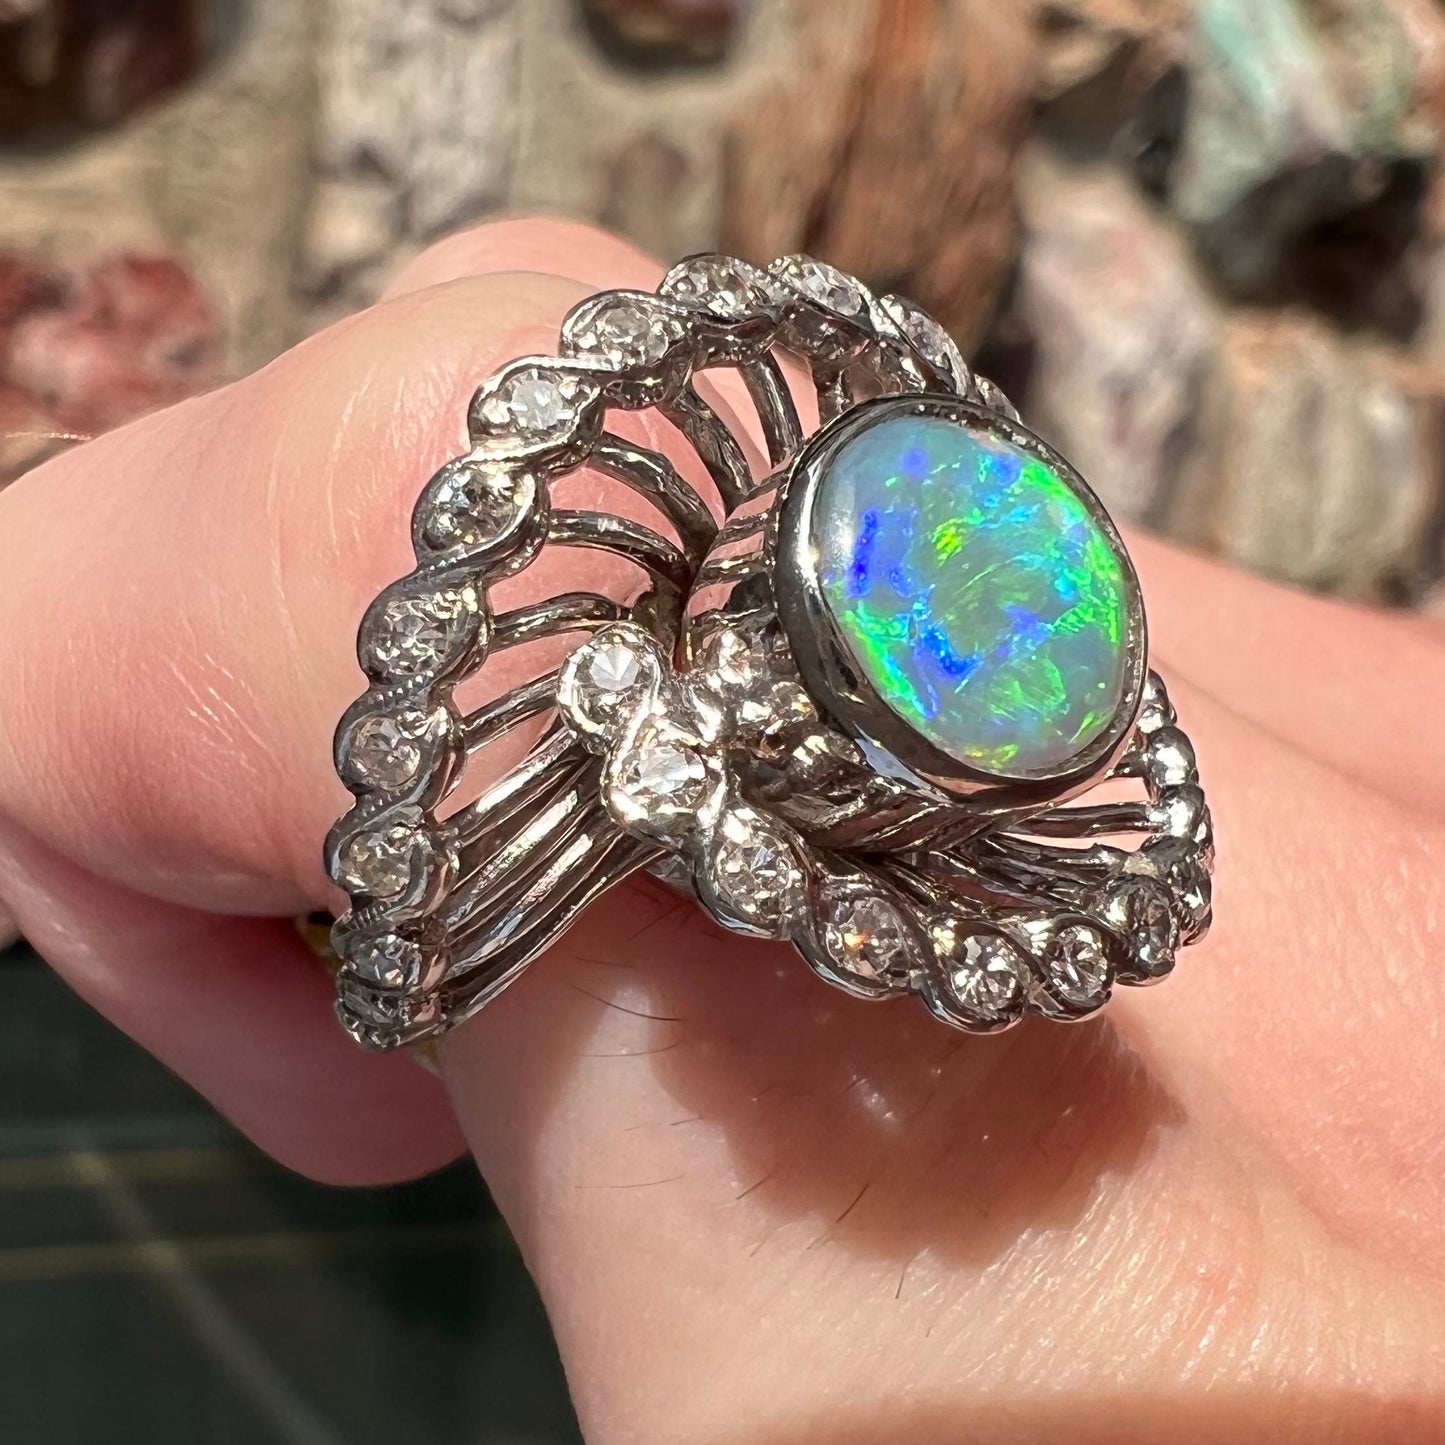 A white gold ring featuring a round cabochon cut black opal set in a swirl of round cut diamonds.